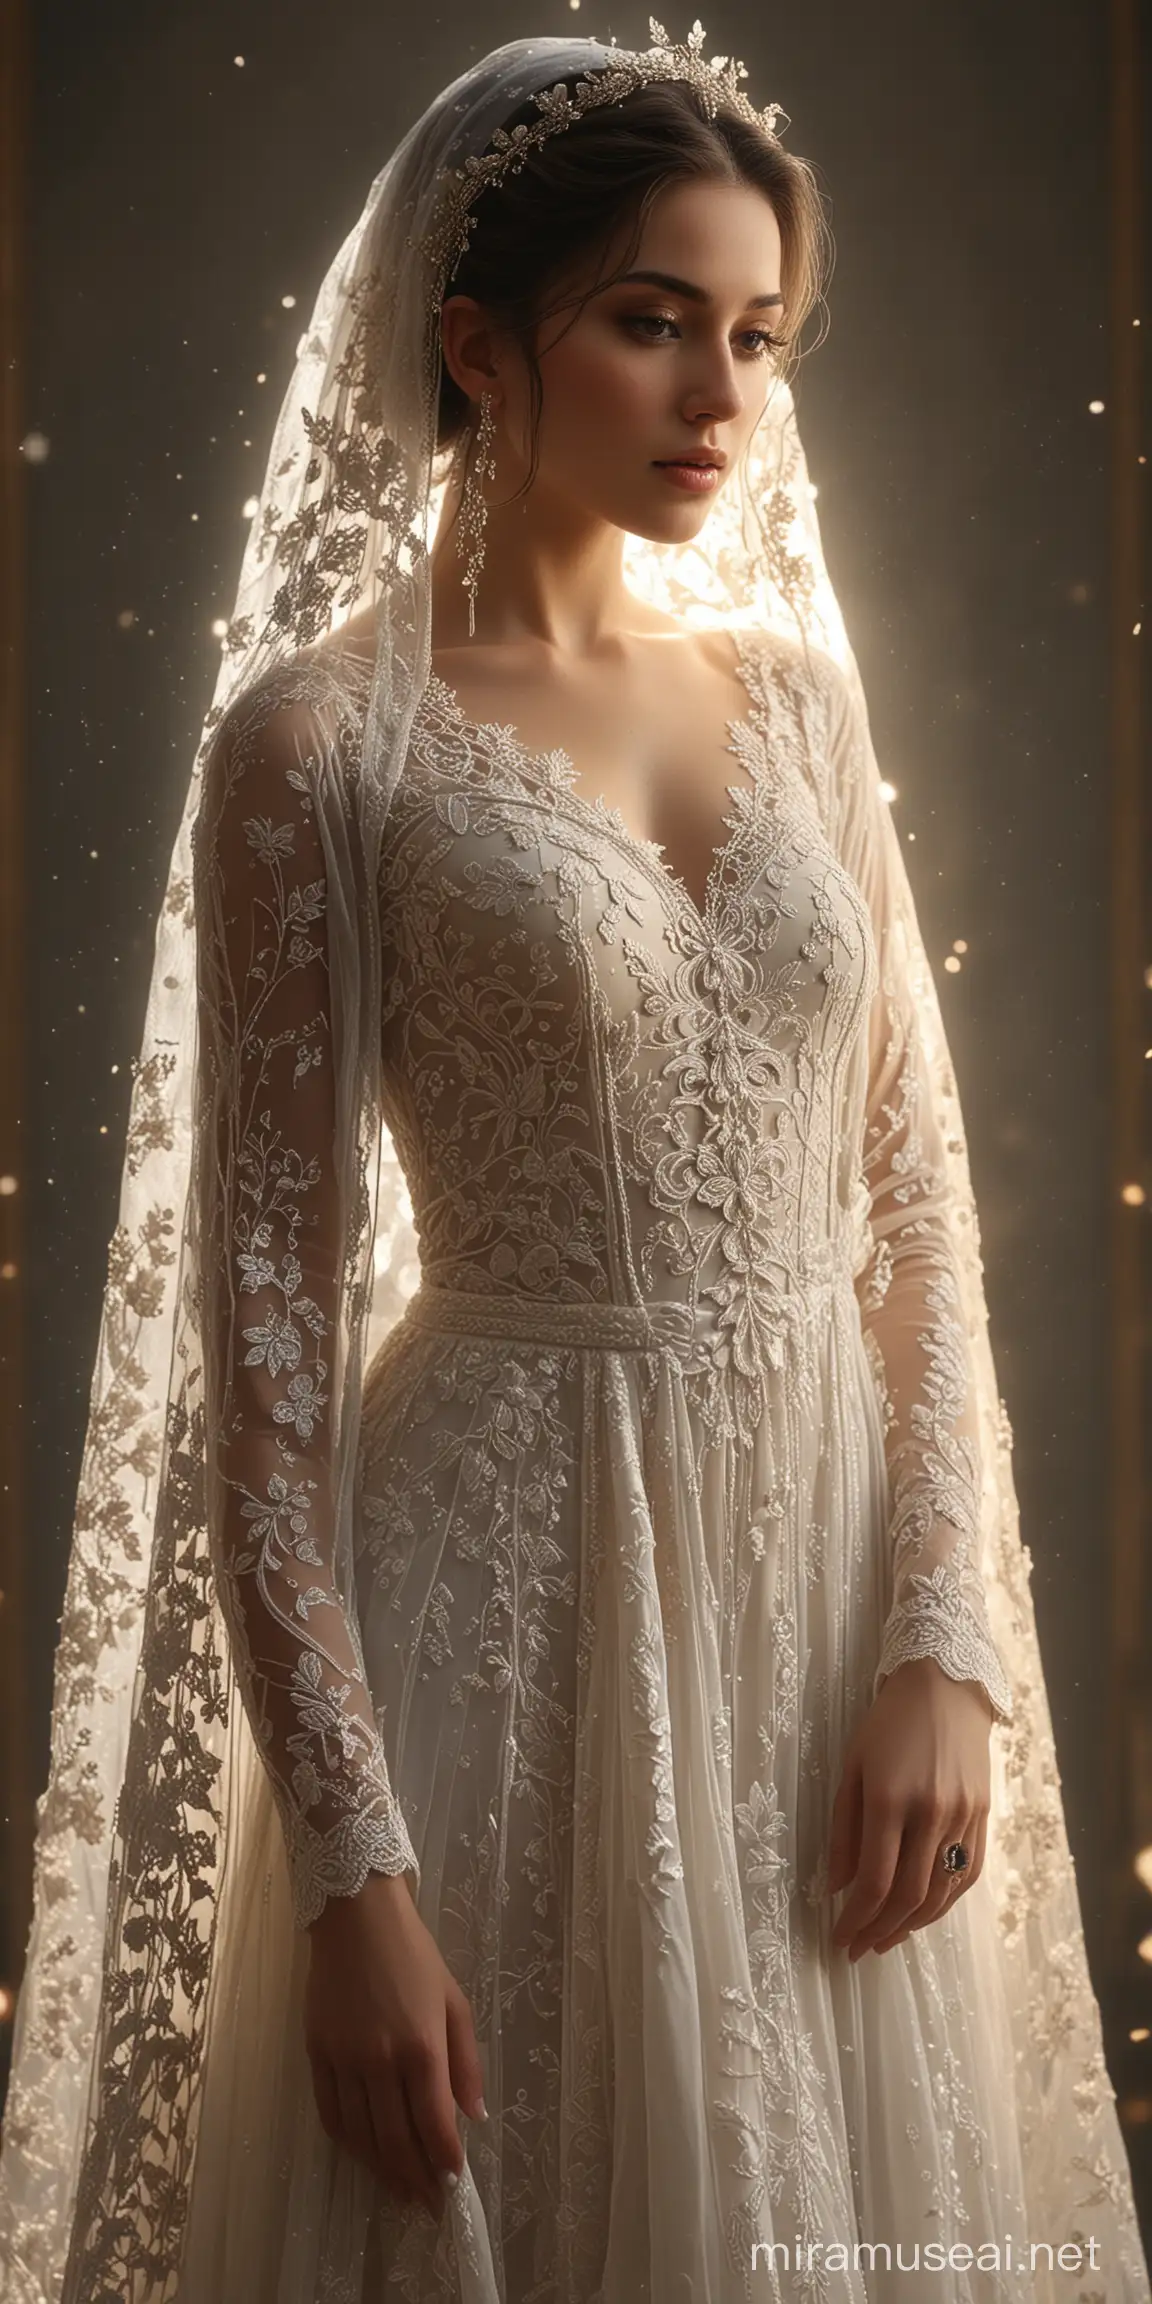 Ethereal Angelic Woman in Lace Dress with Veil and Hair Ornaments in a Mystical Cinematic Setting